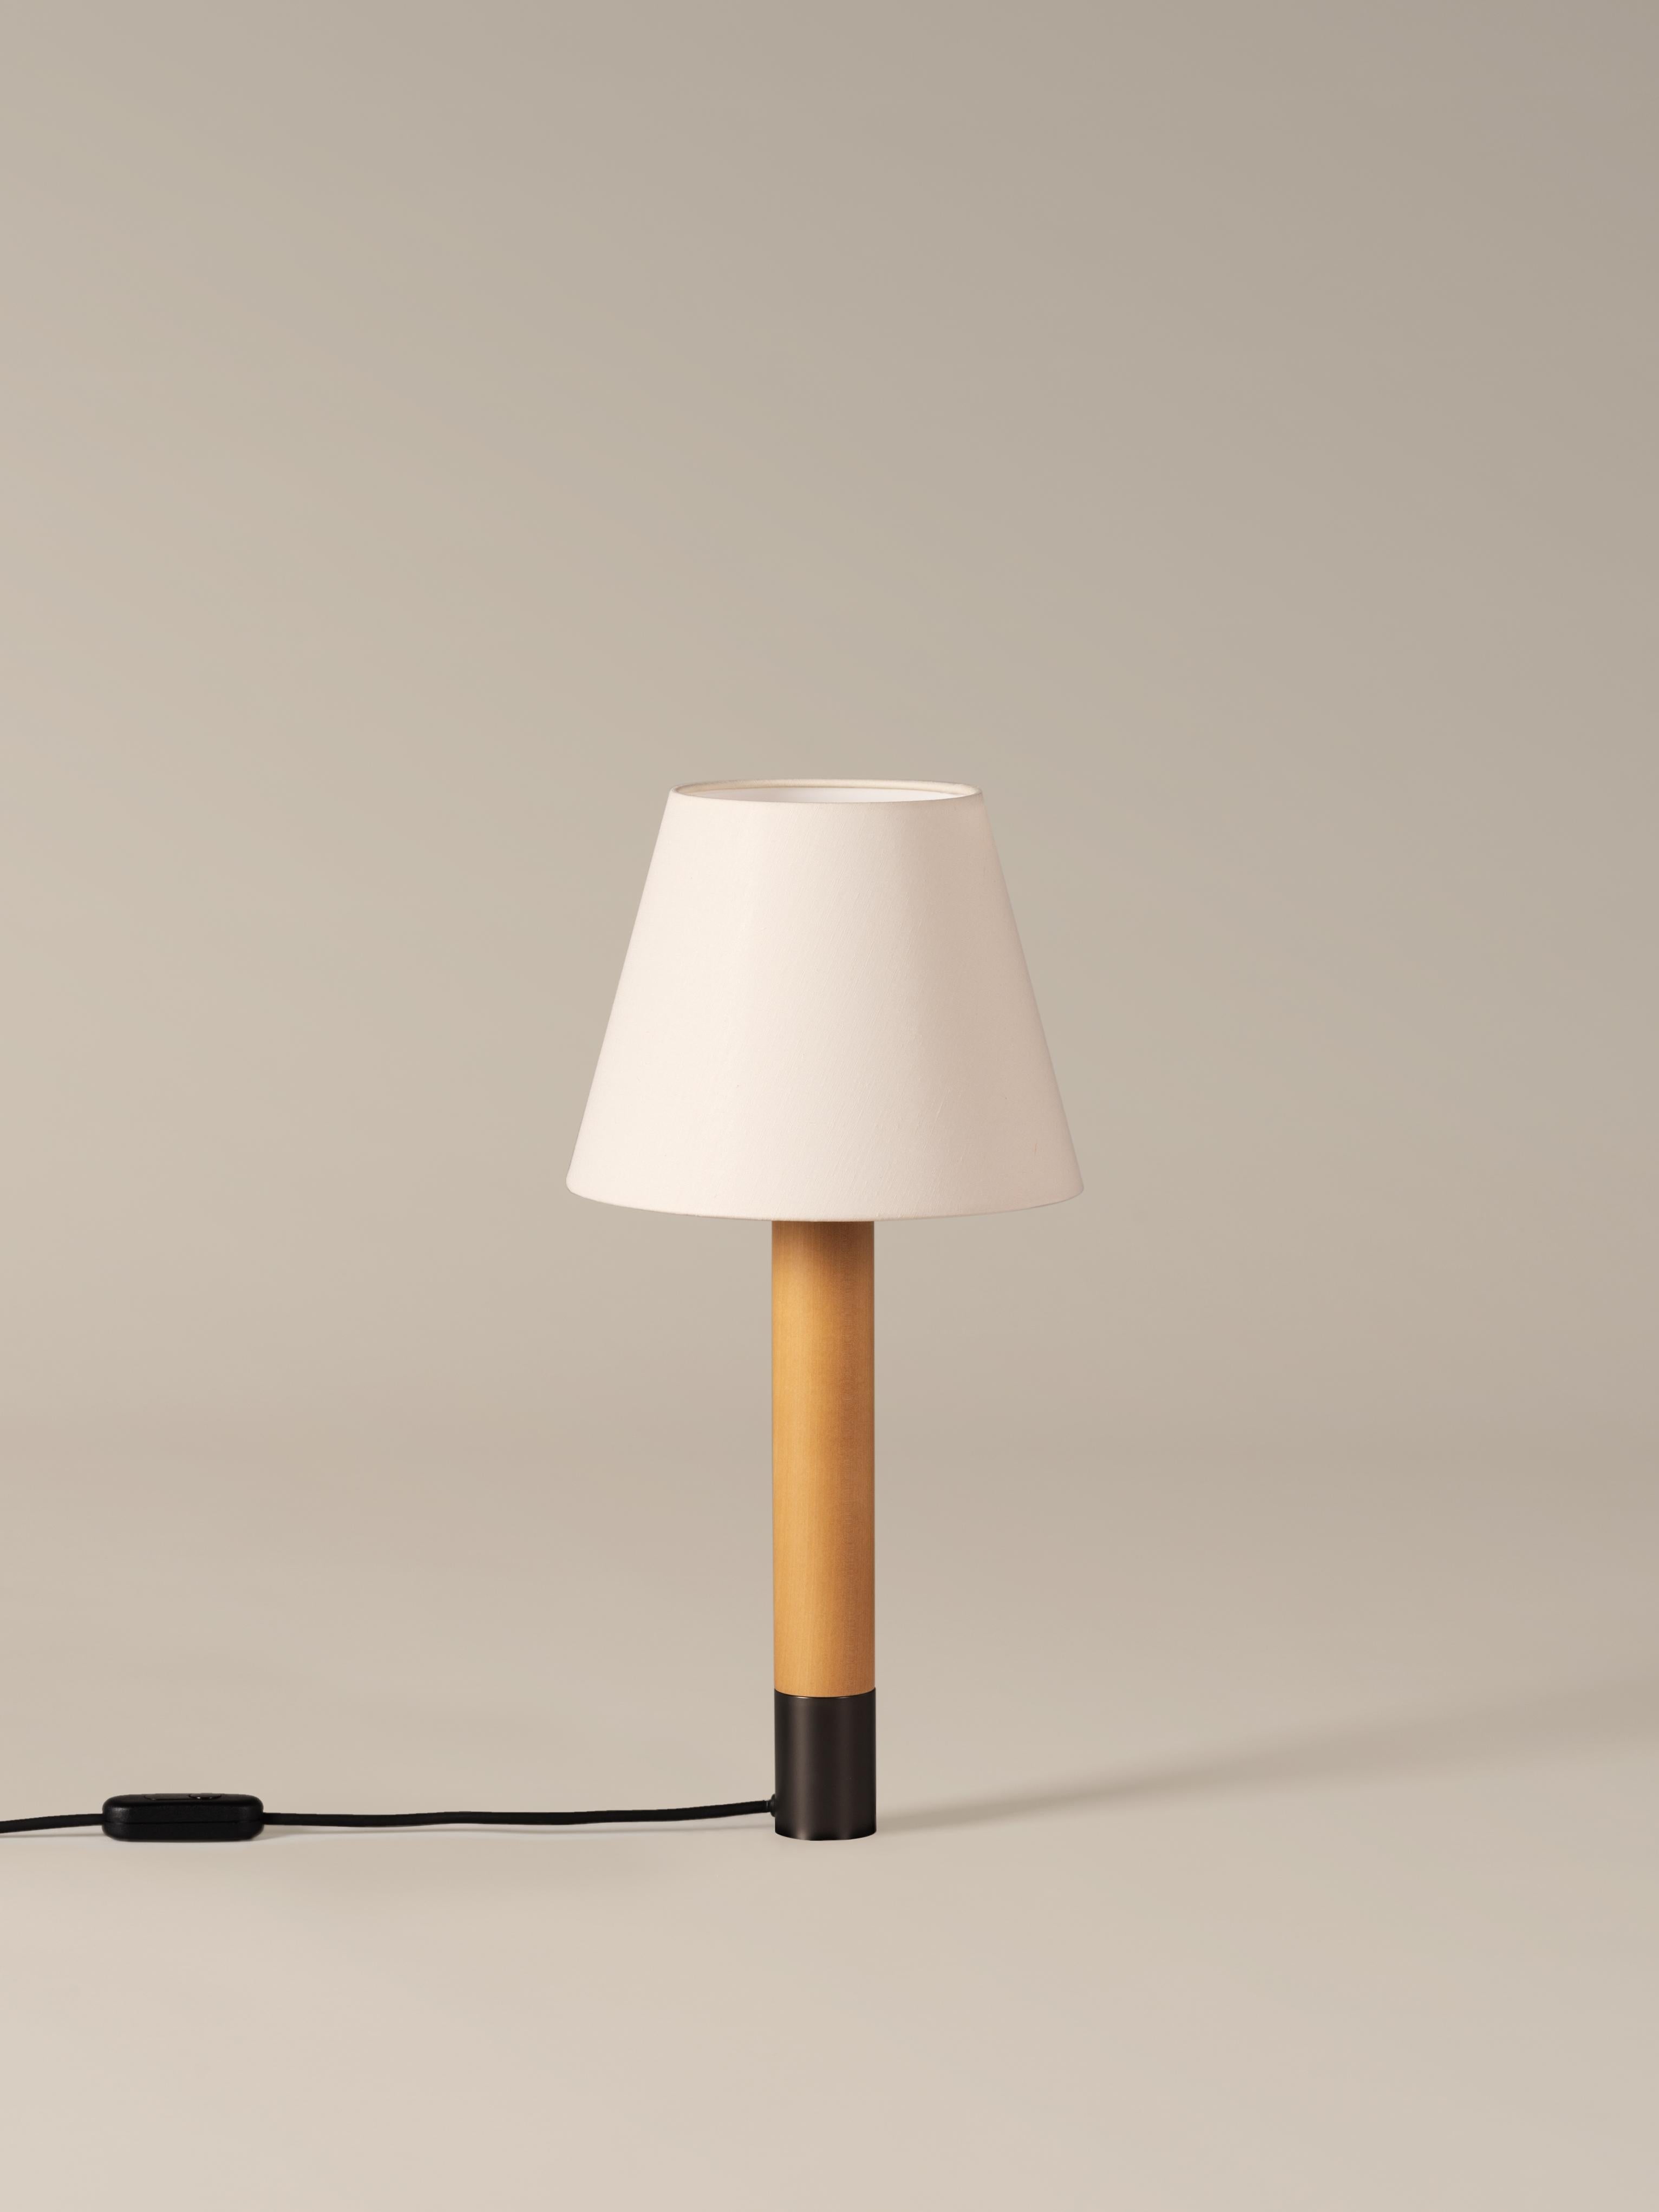 Modern Bronze and White Básica M1 Table Lamp by Santiago Roqueta, Santa & Cole For Sale